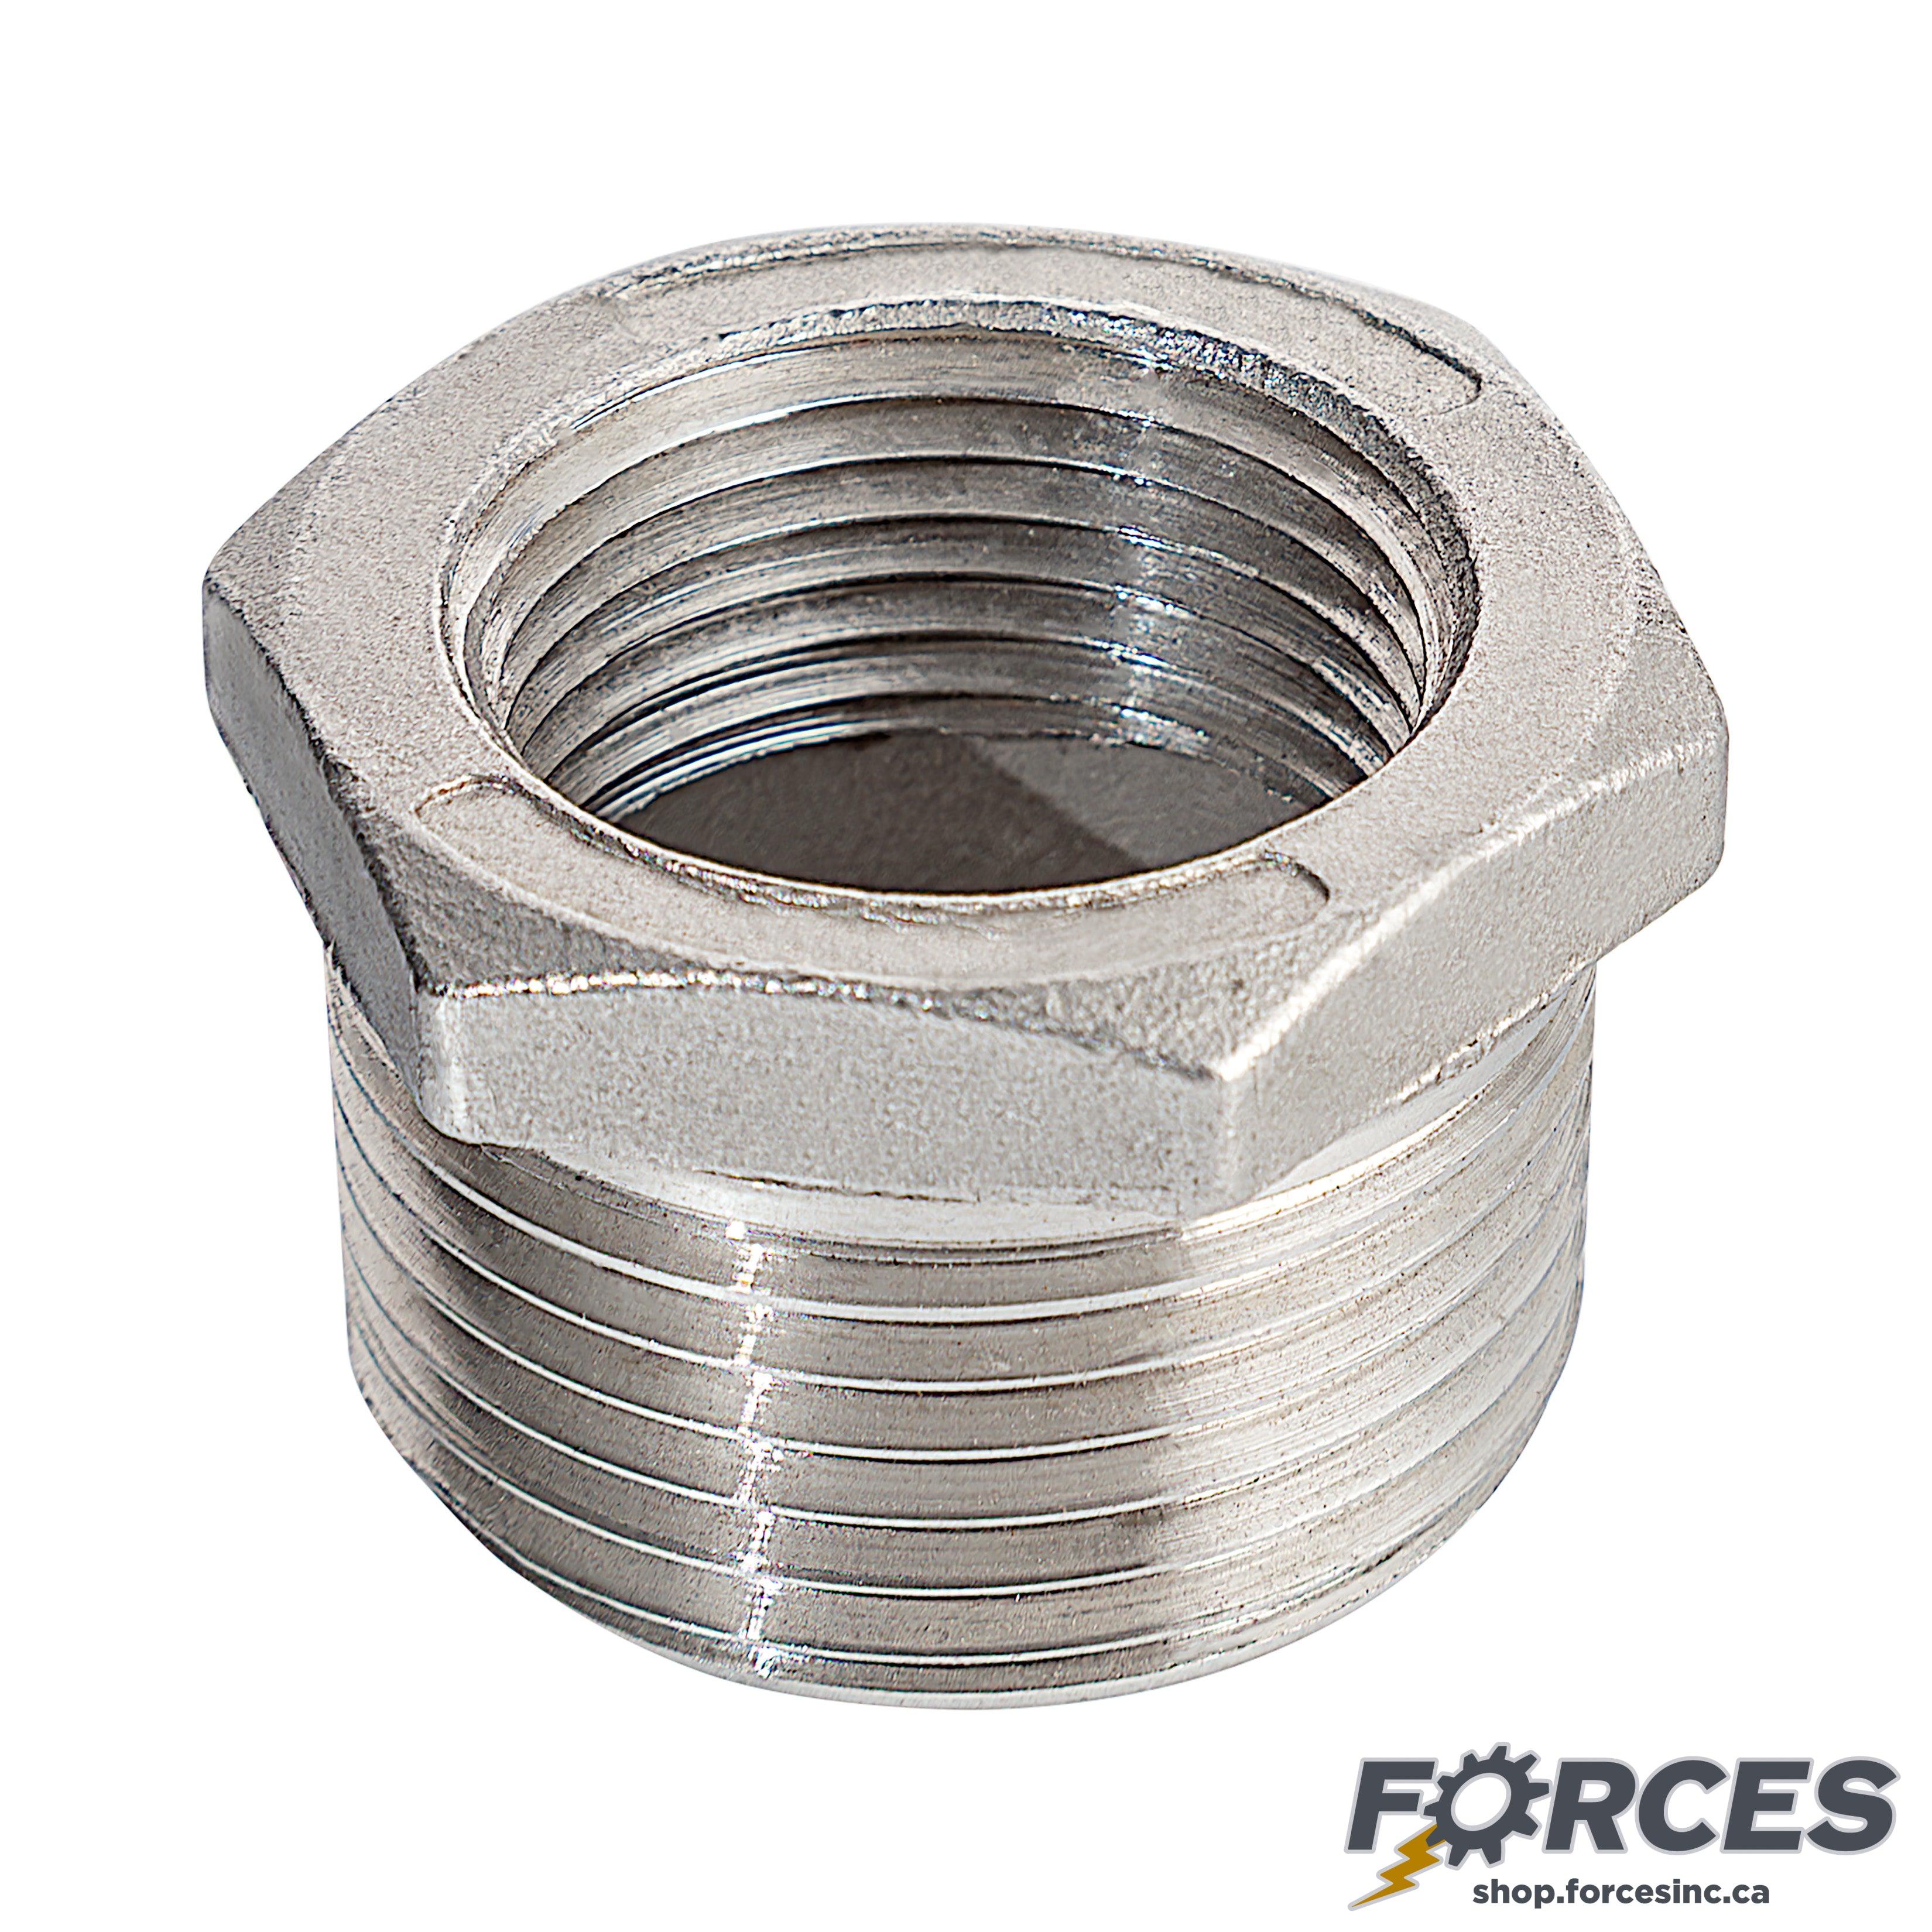 1/4" X 1/8" Bushing Reducer NPT #150 - Stainless Steel 316 - Forces Inc